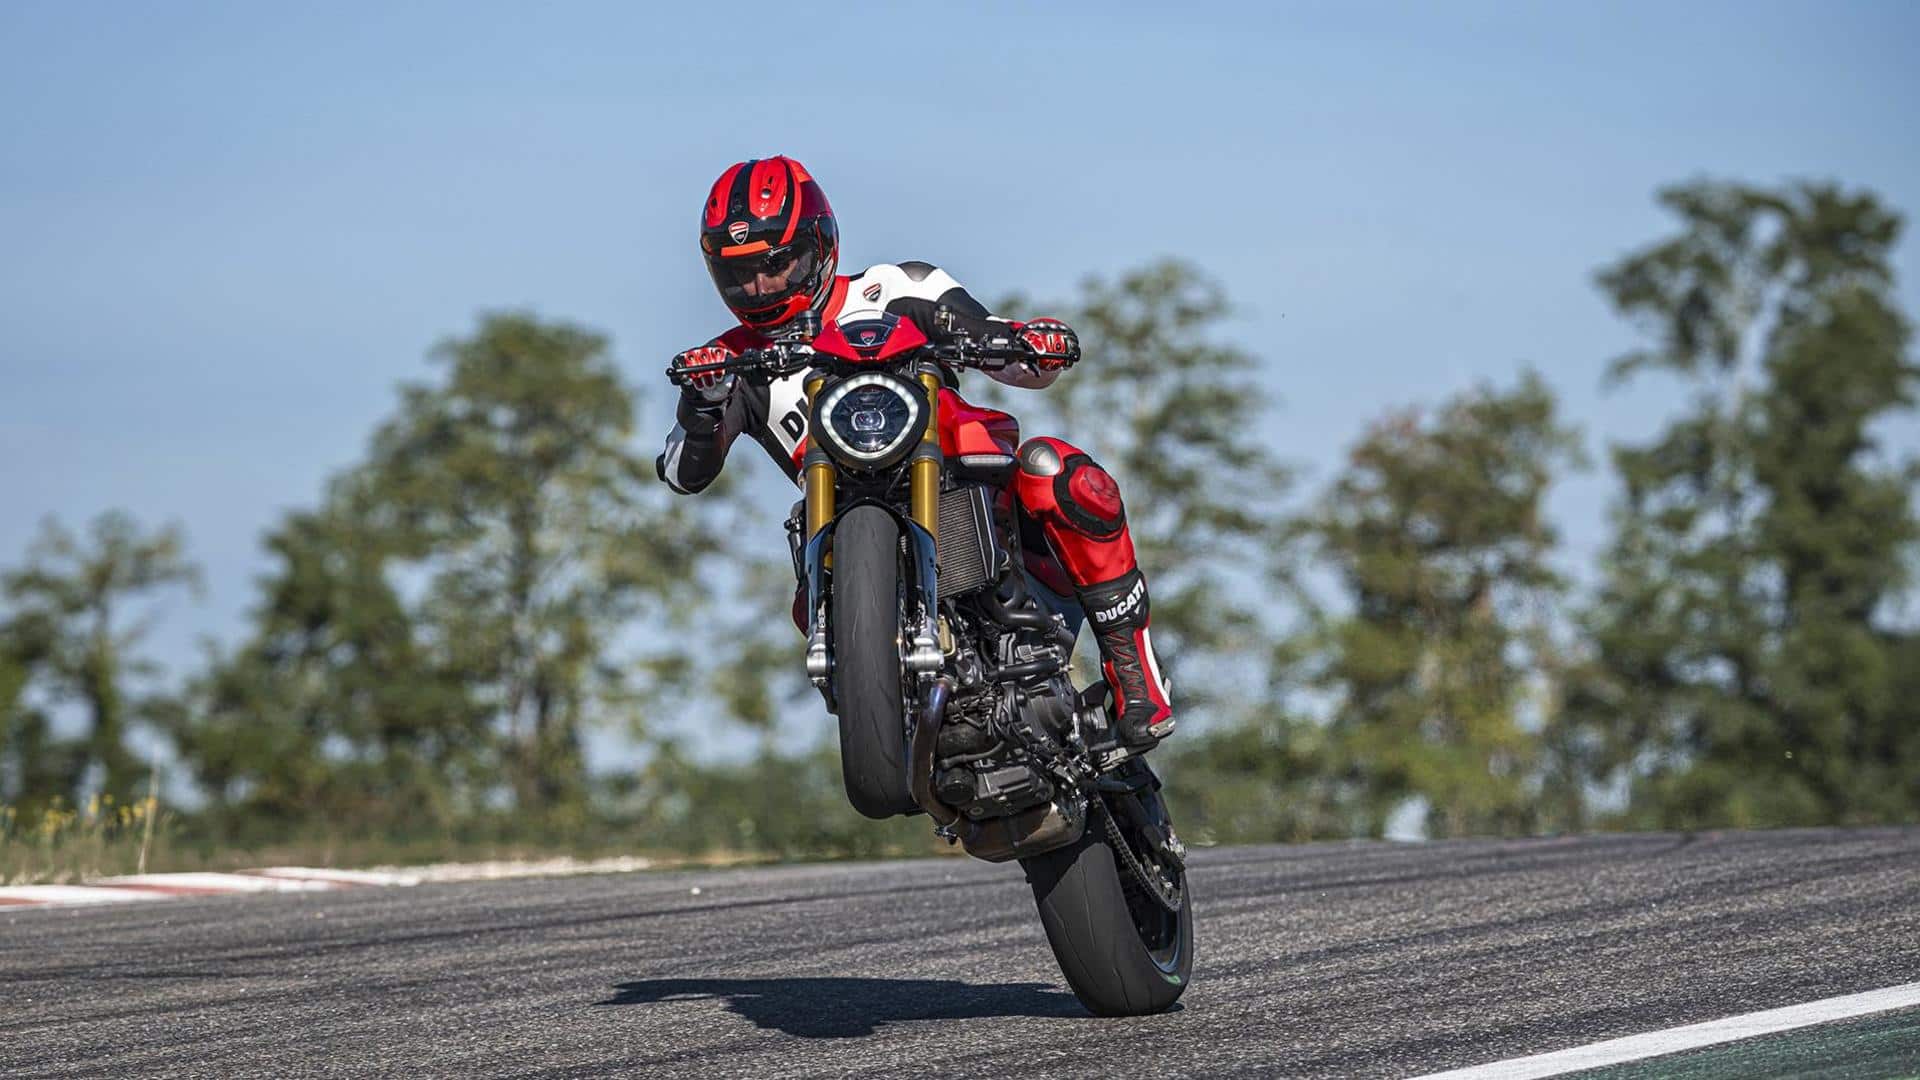 Ducati Monster SP launched at Rs. 15.95 lakh: Check features